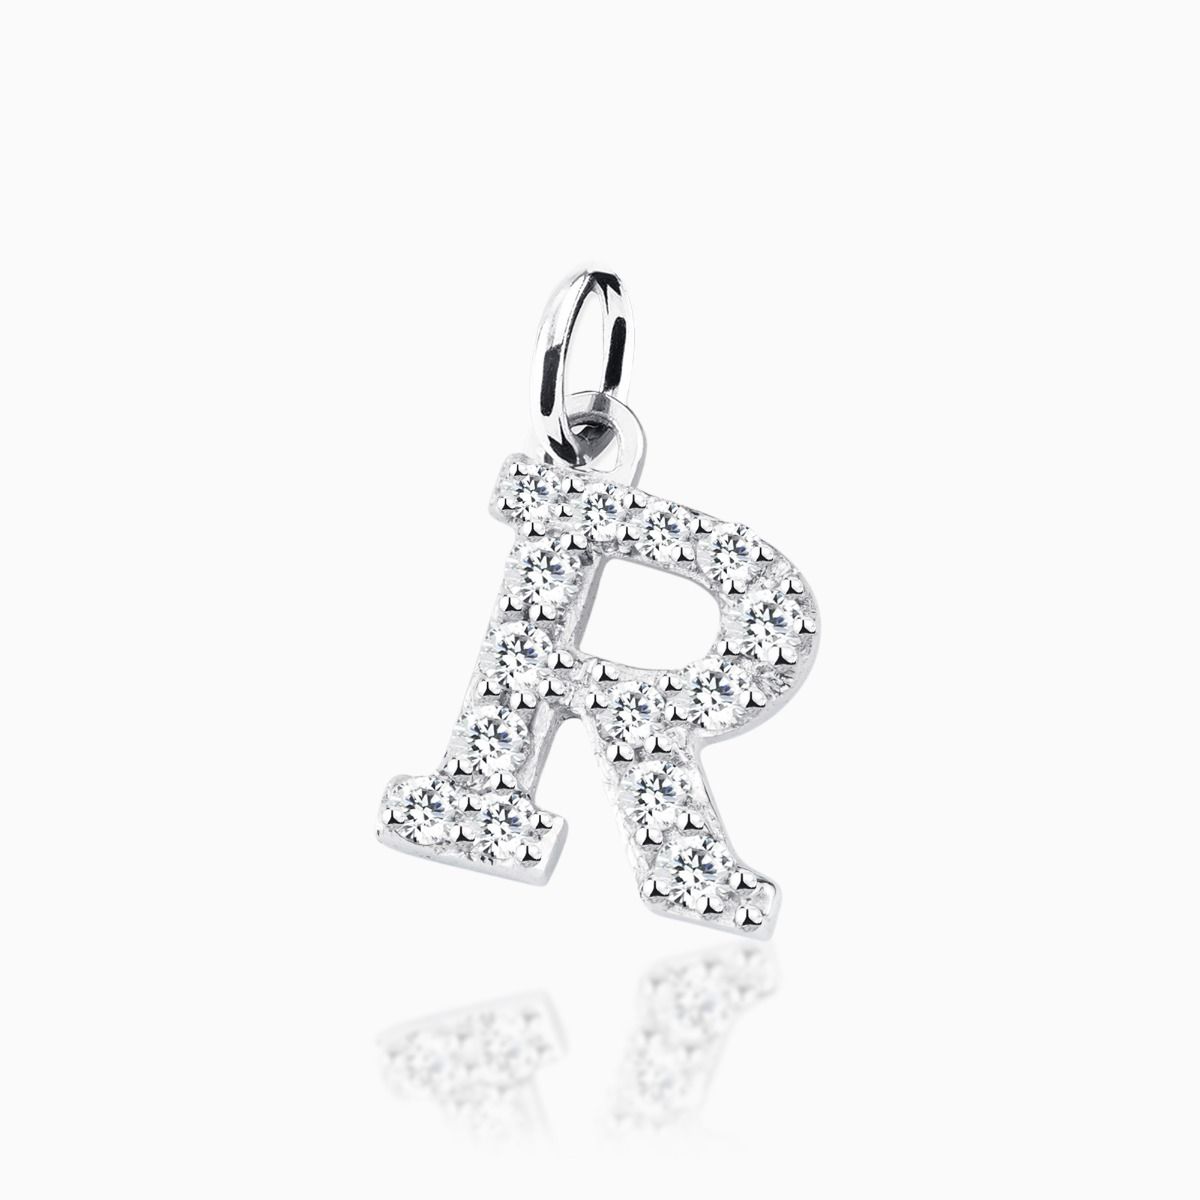 Letter R pave setting